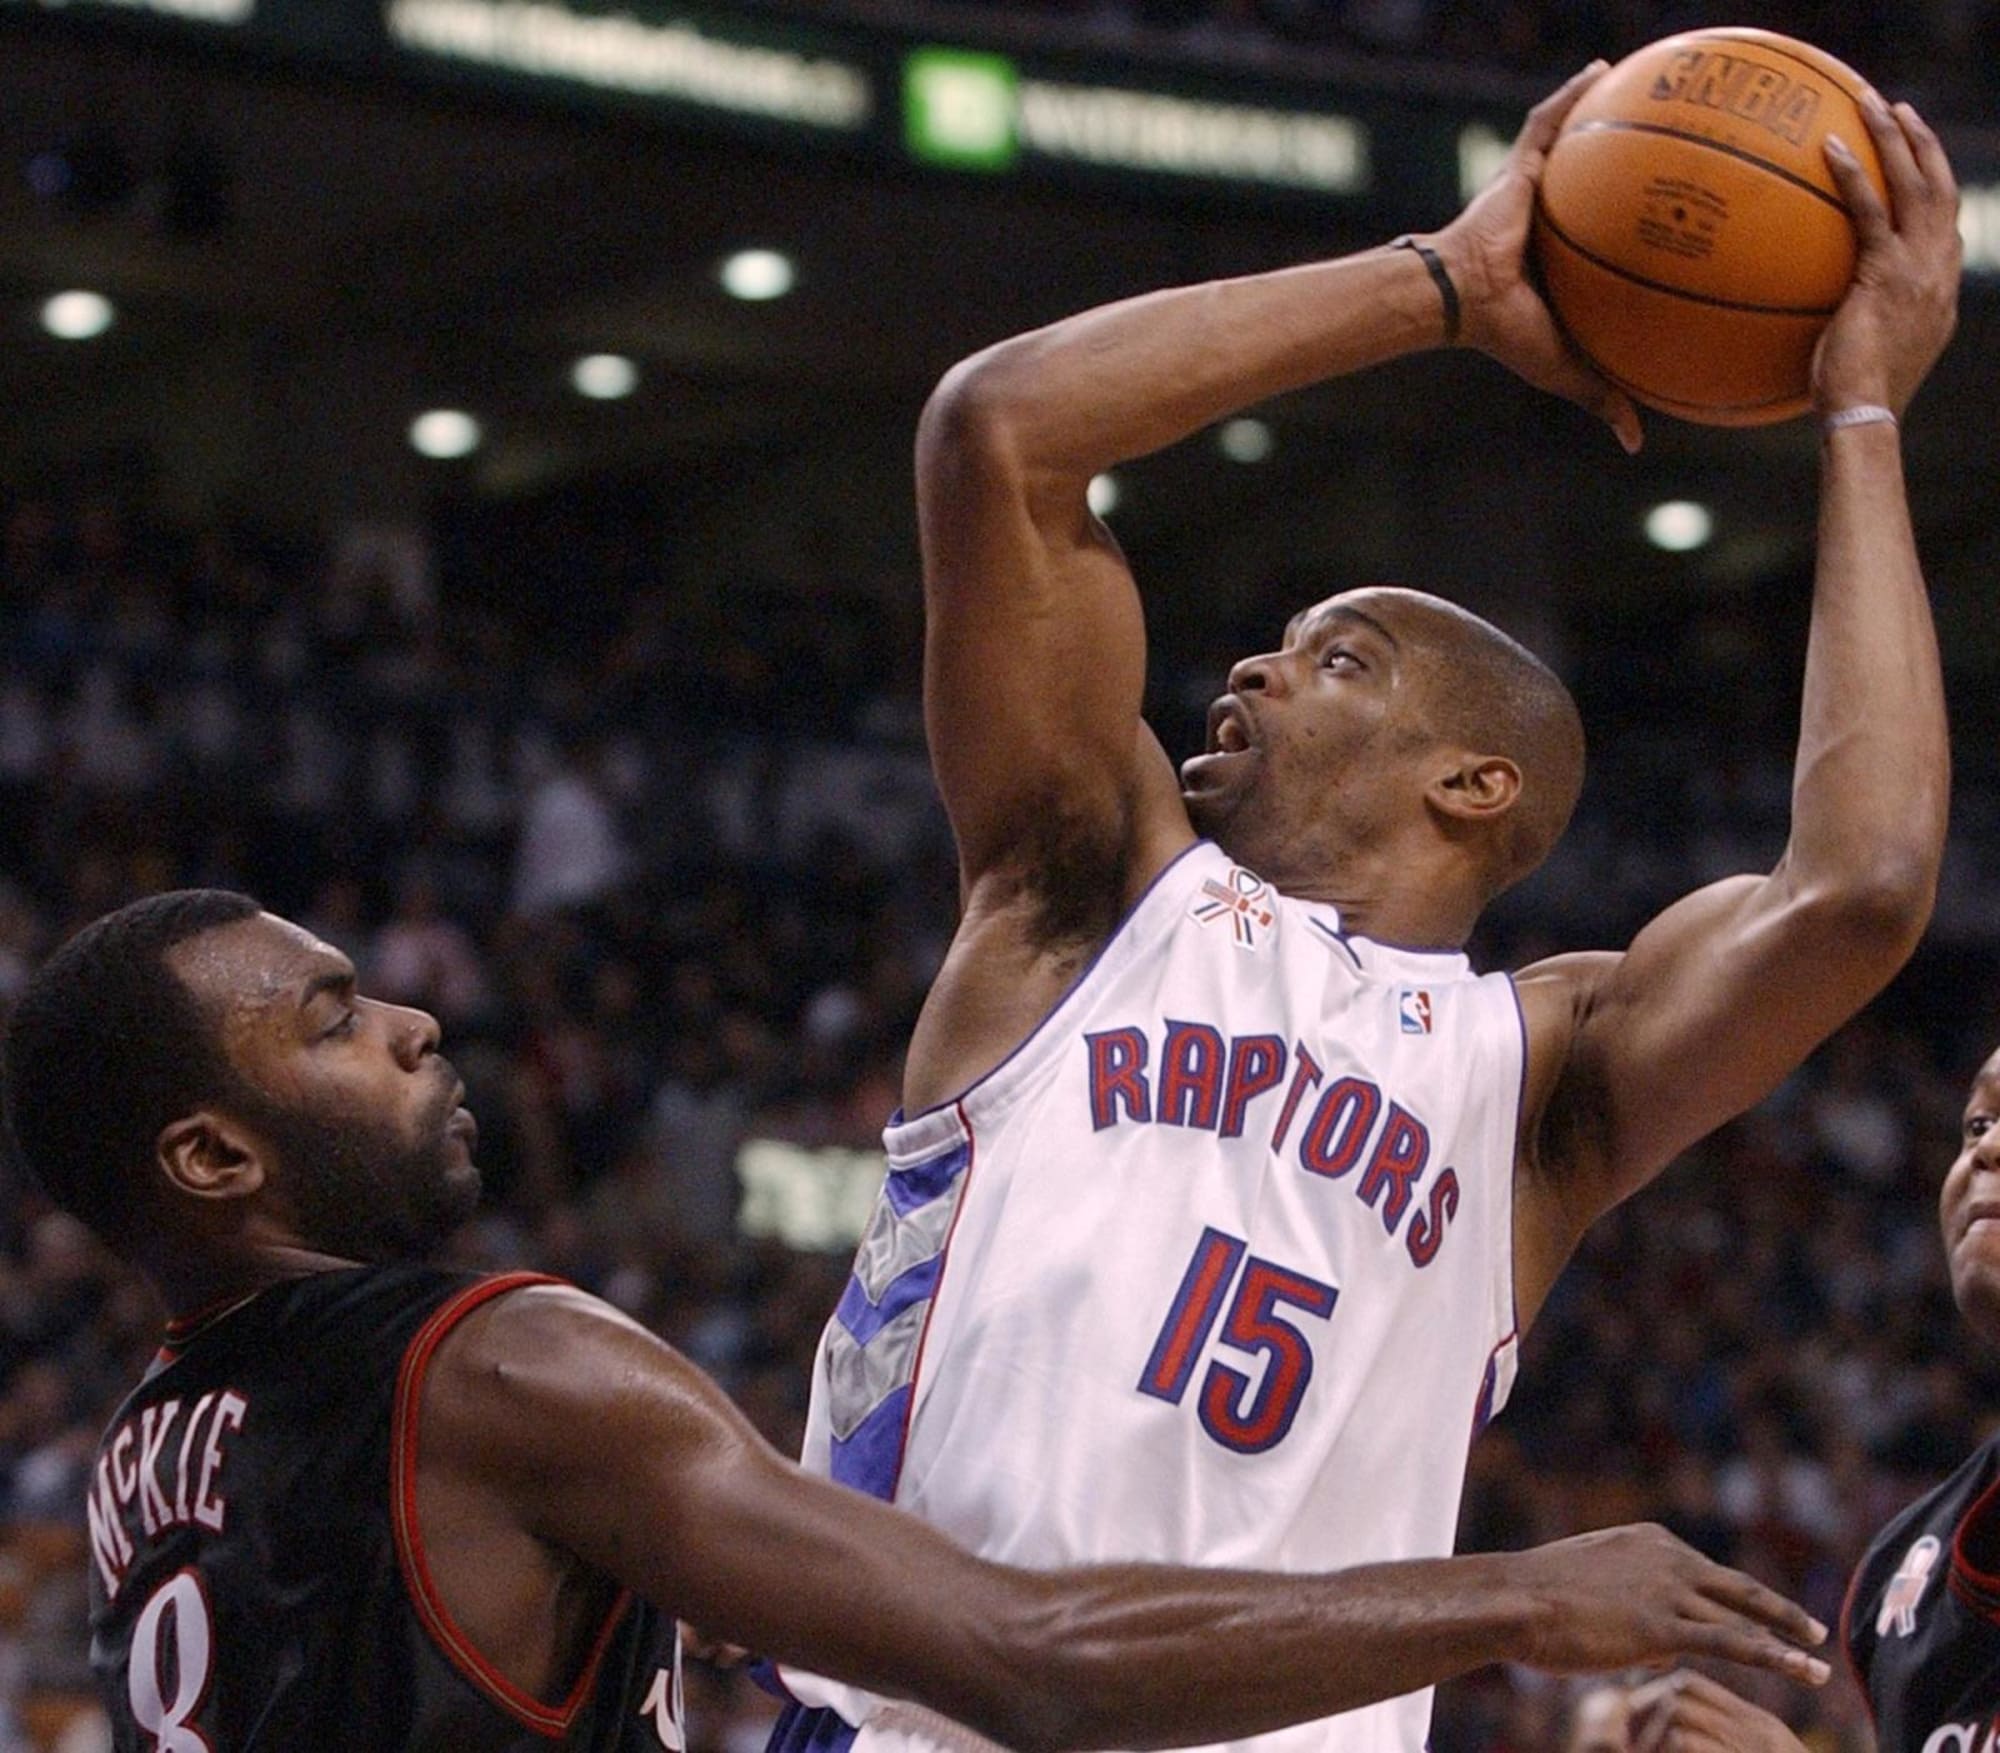 Toronto Raptors and Vince Carter: The 2001 playoffs and the rise